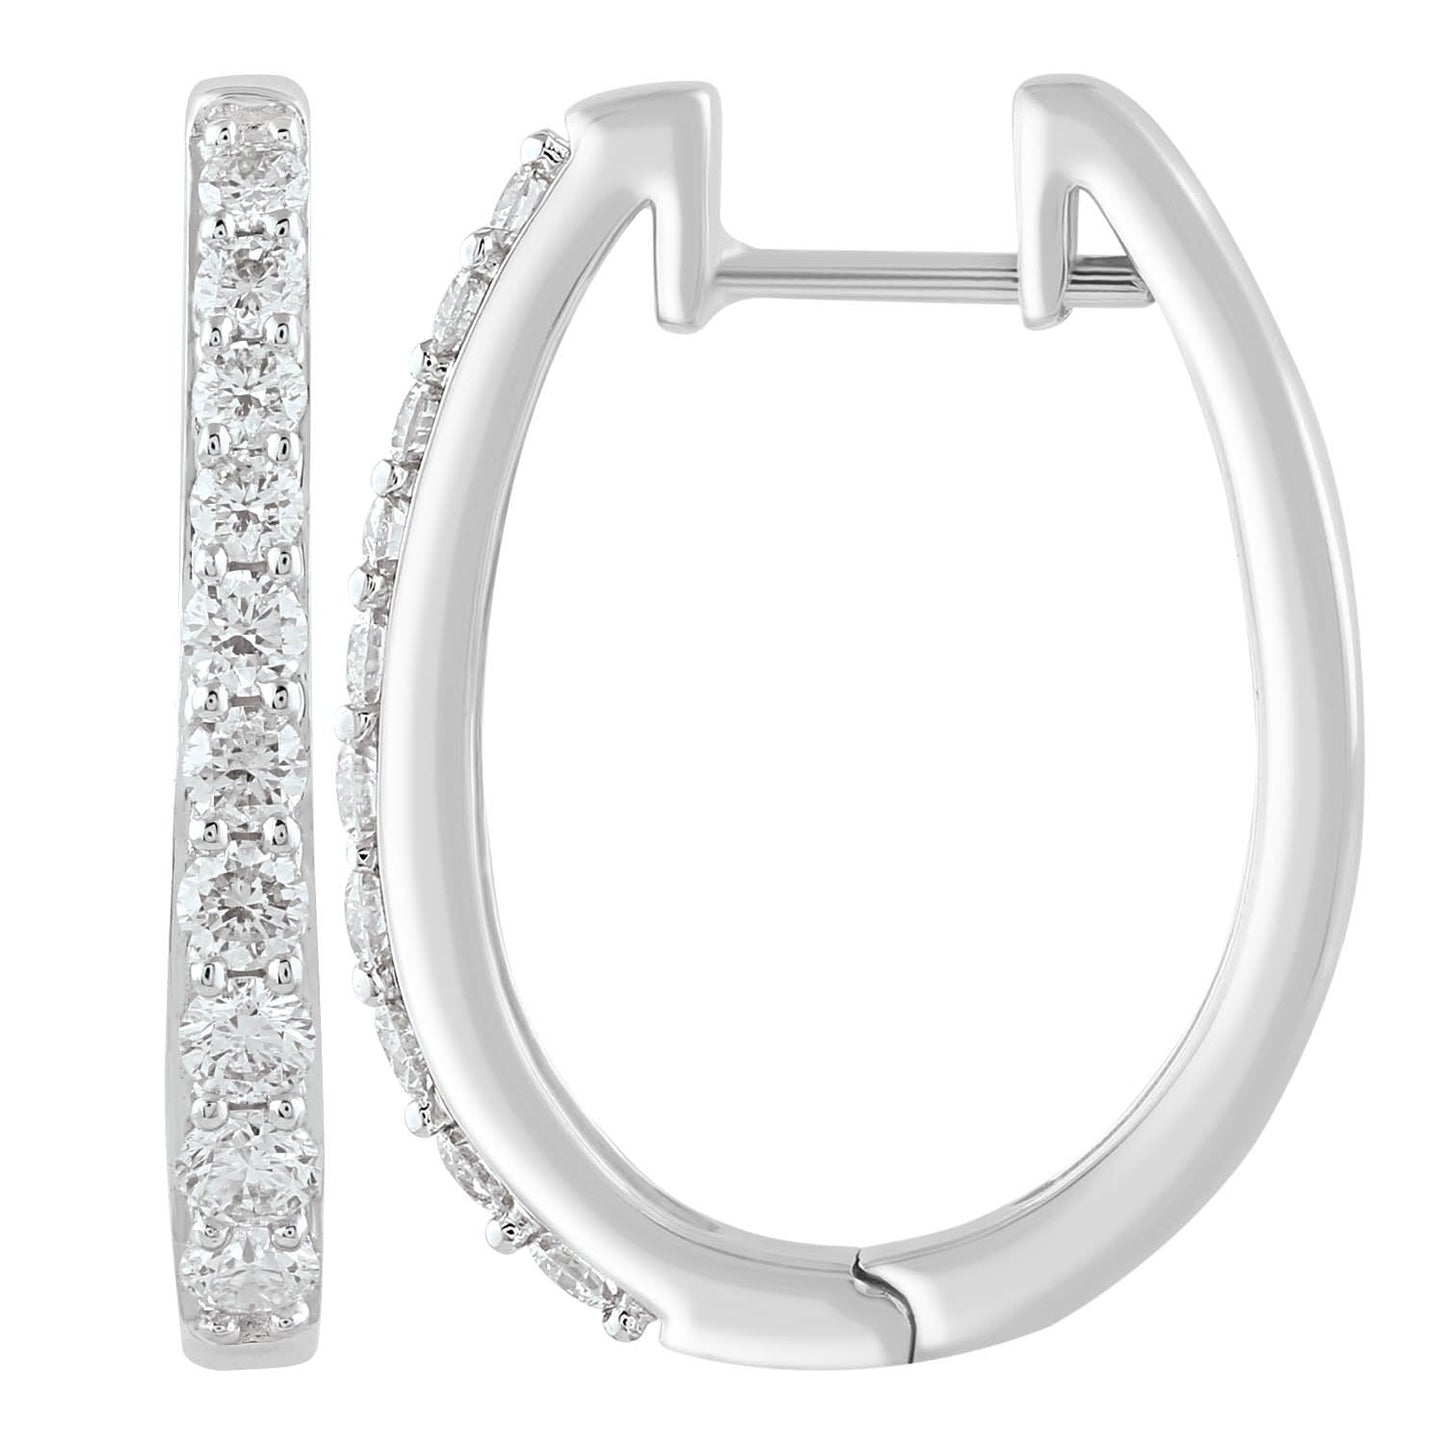 Huggie Earrings with 0.75ct Diamonds in 9K White Gold